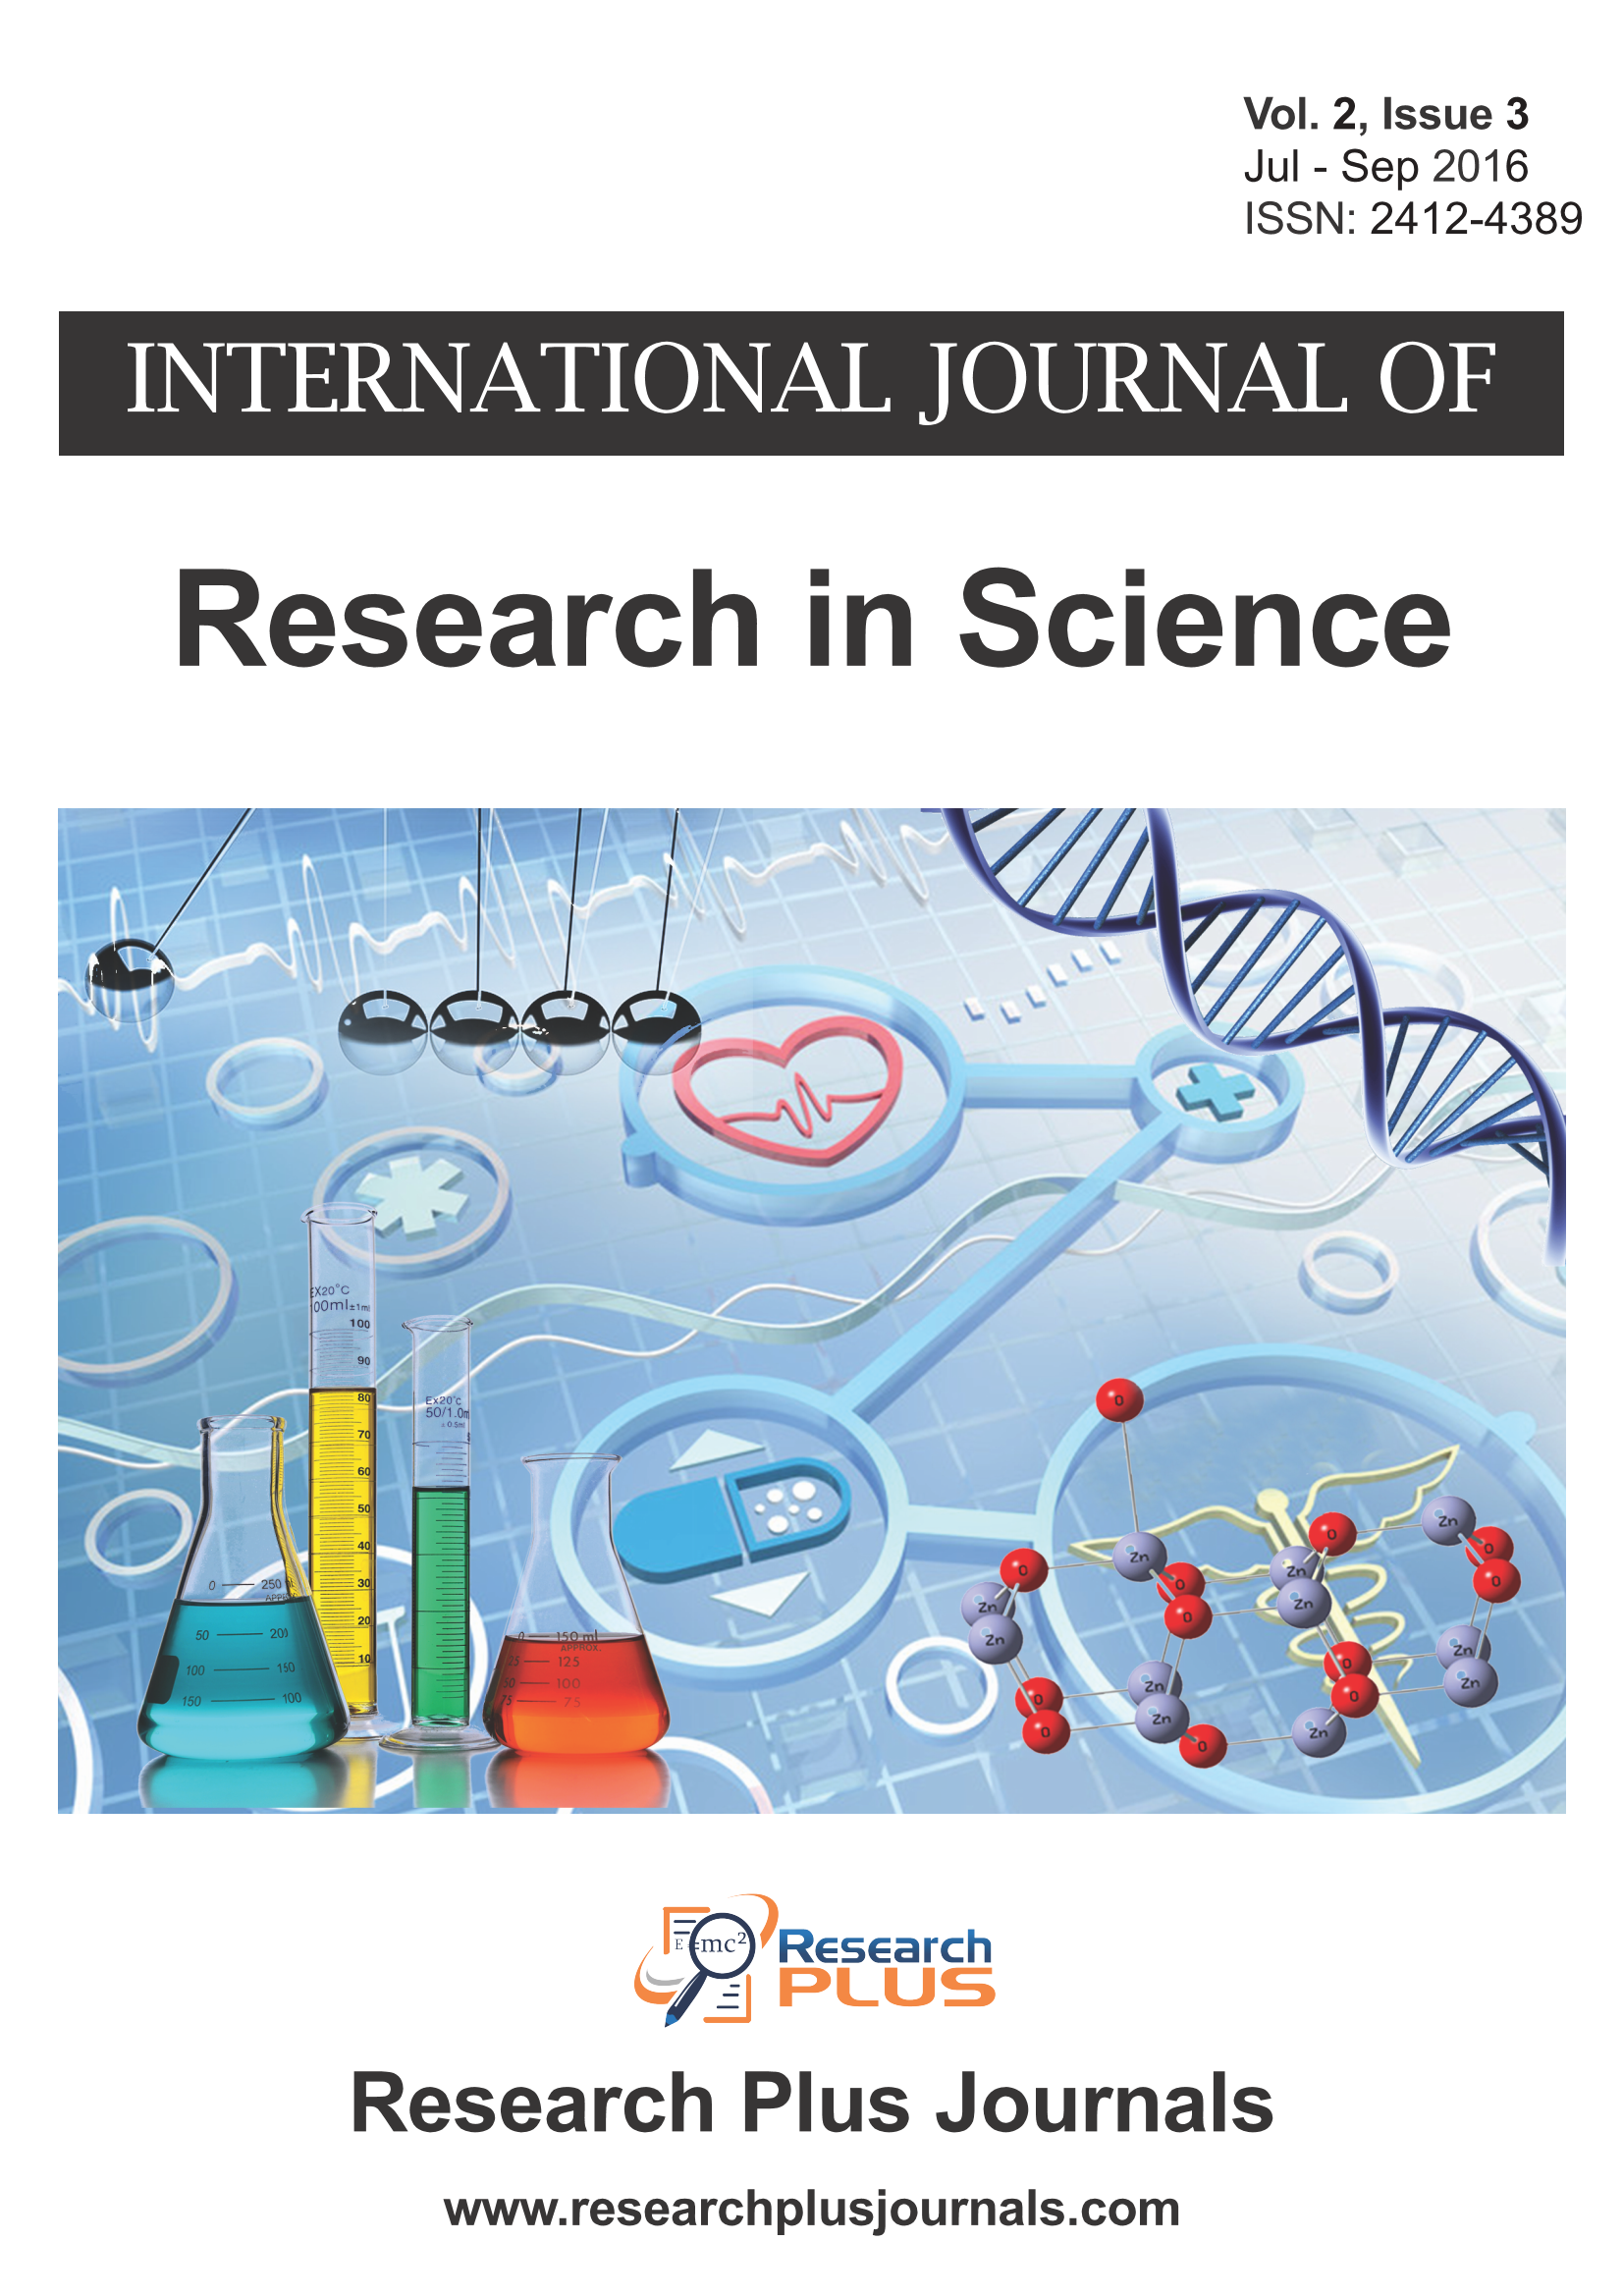 Vol 2 No 3 (2016): International Journal of Research in Science